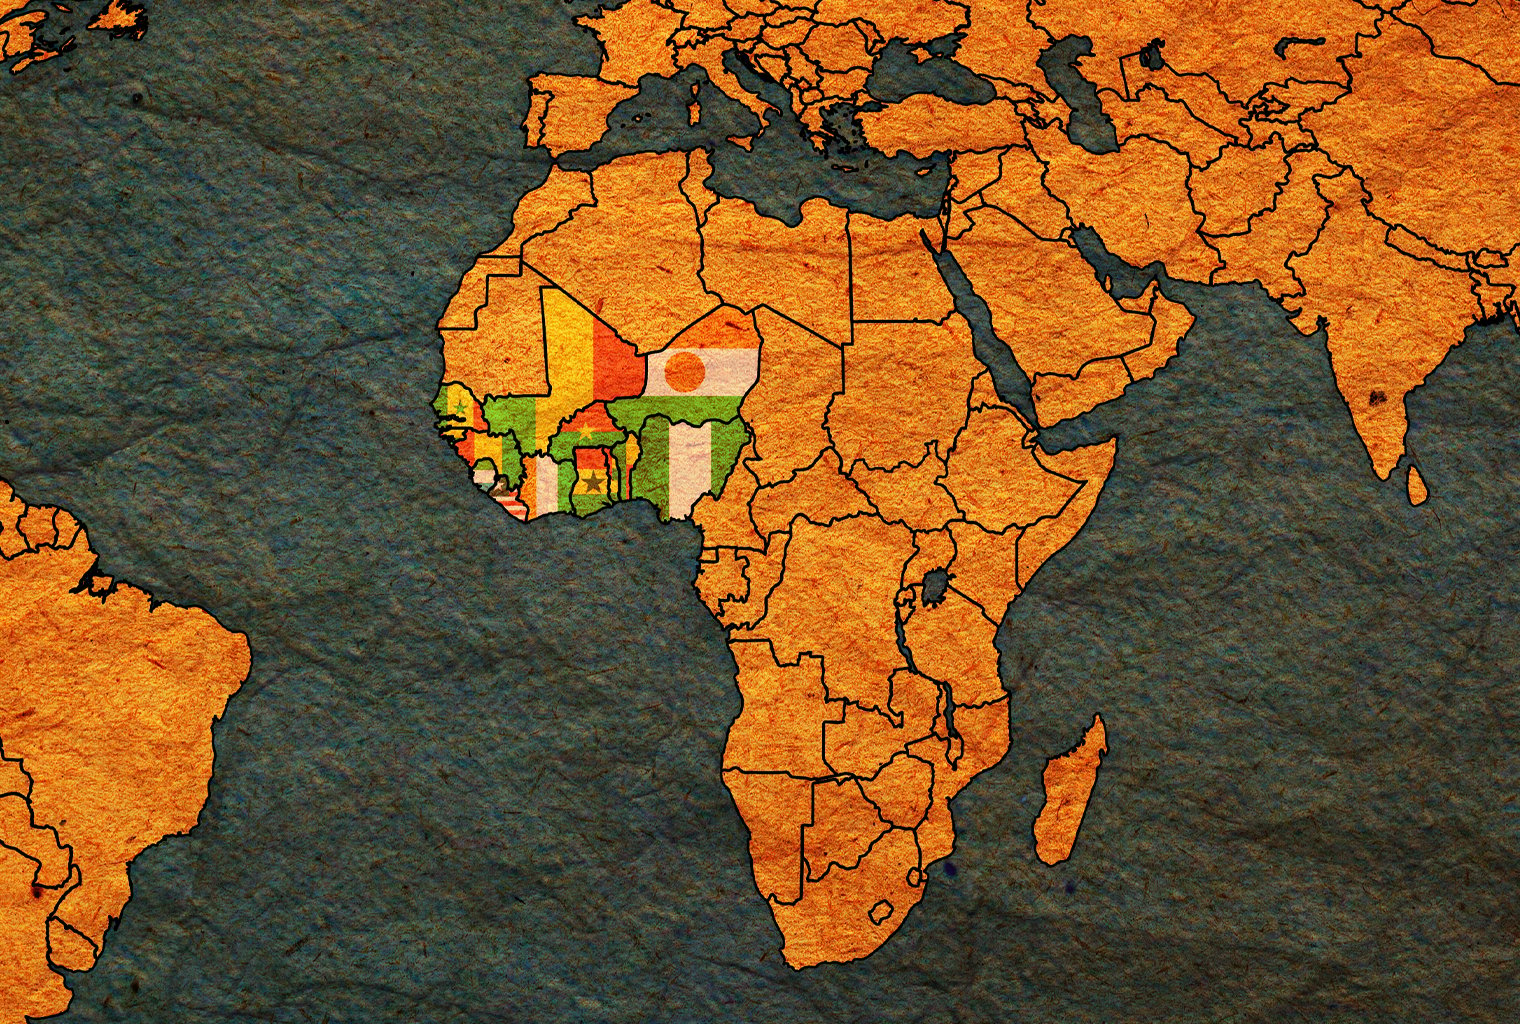 Africa's Interest in Bitcoin Remains High While 15 States Plan to Adopt the 'Eco' Currency